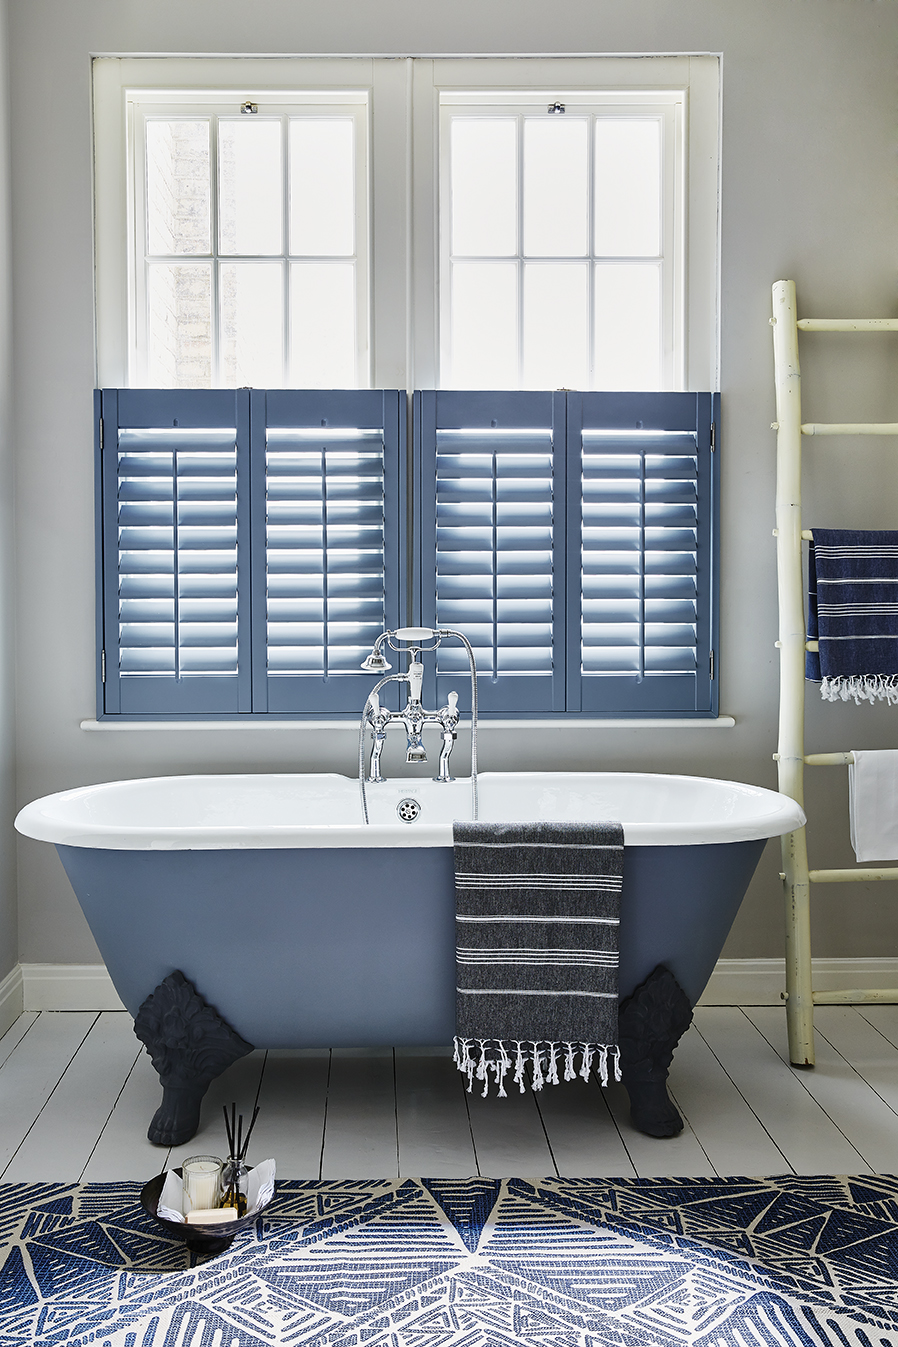 cafe style shutters in a bathroom placeholder